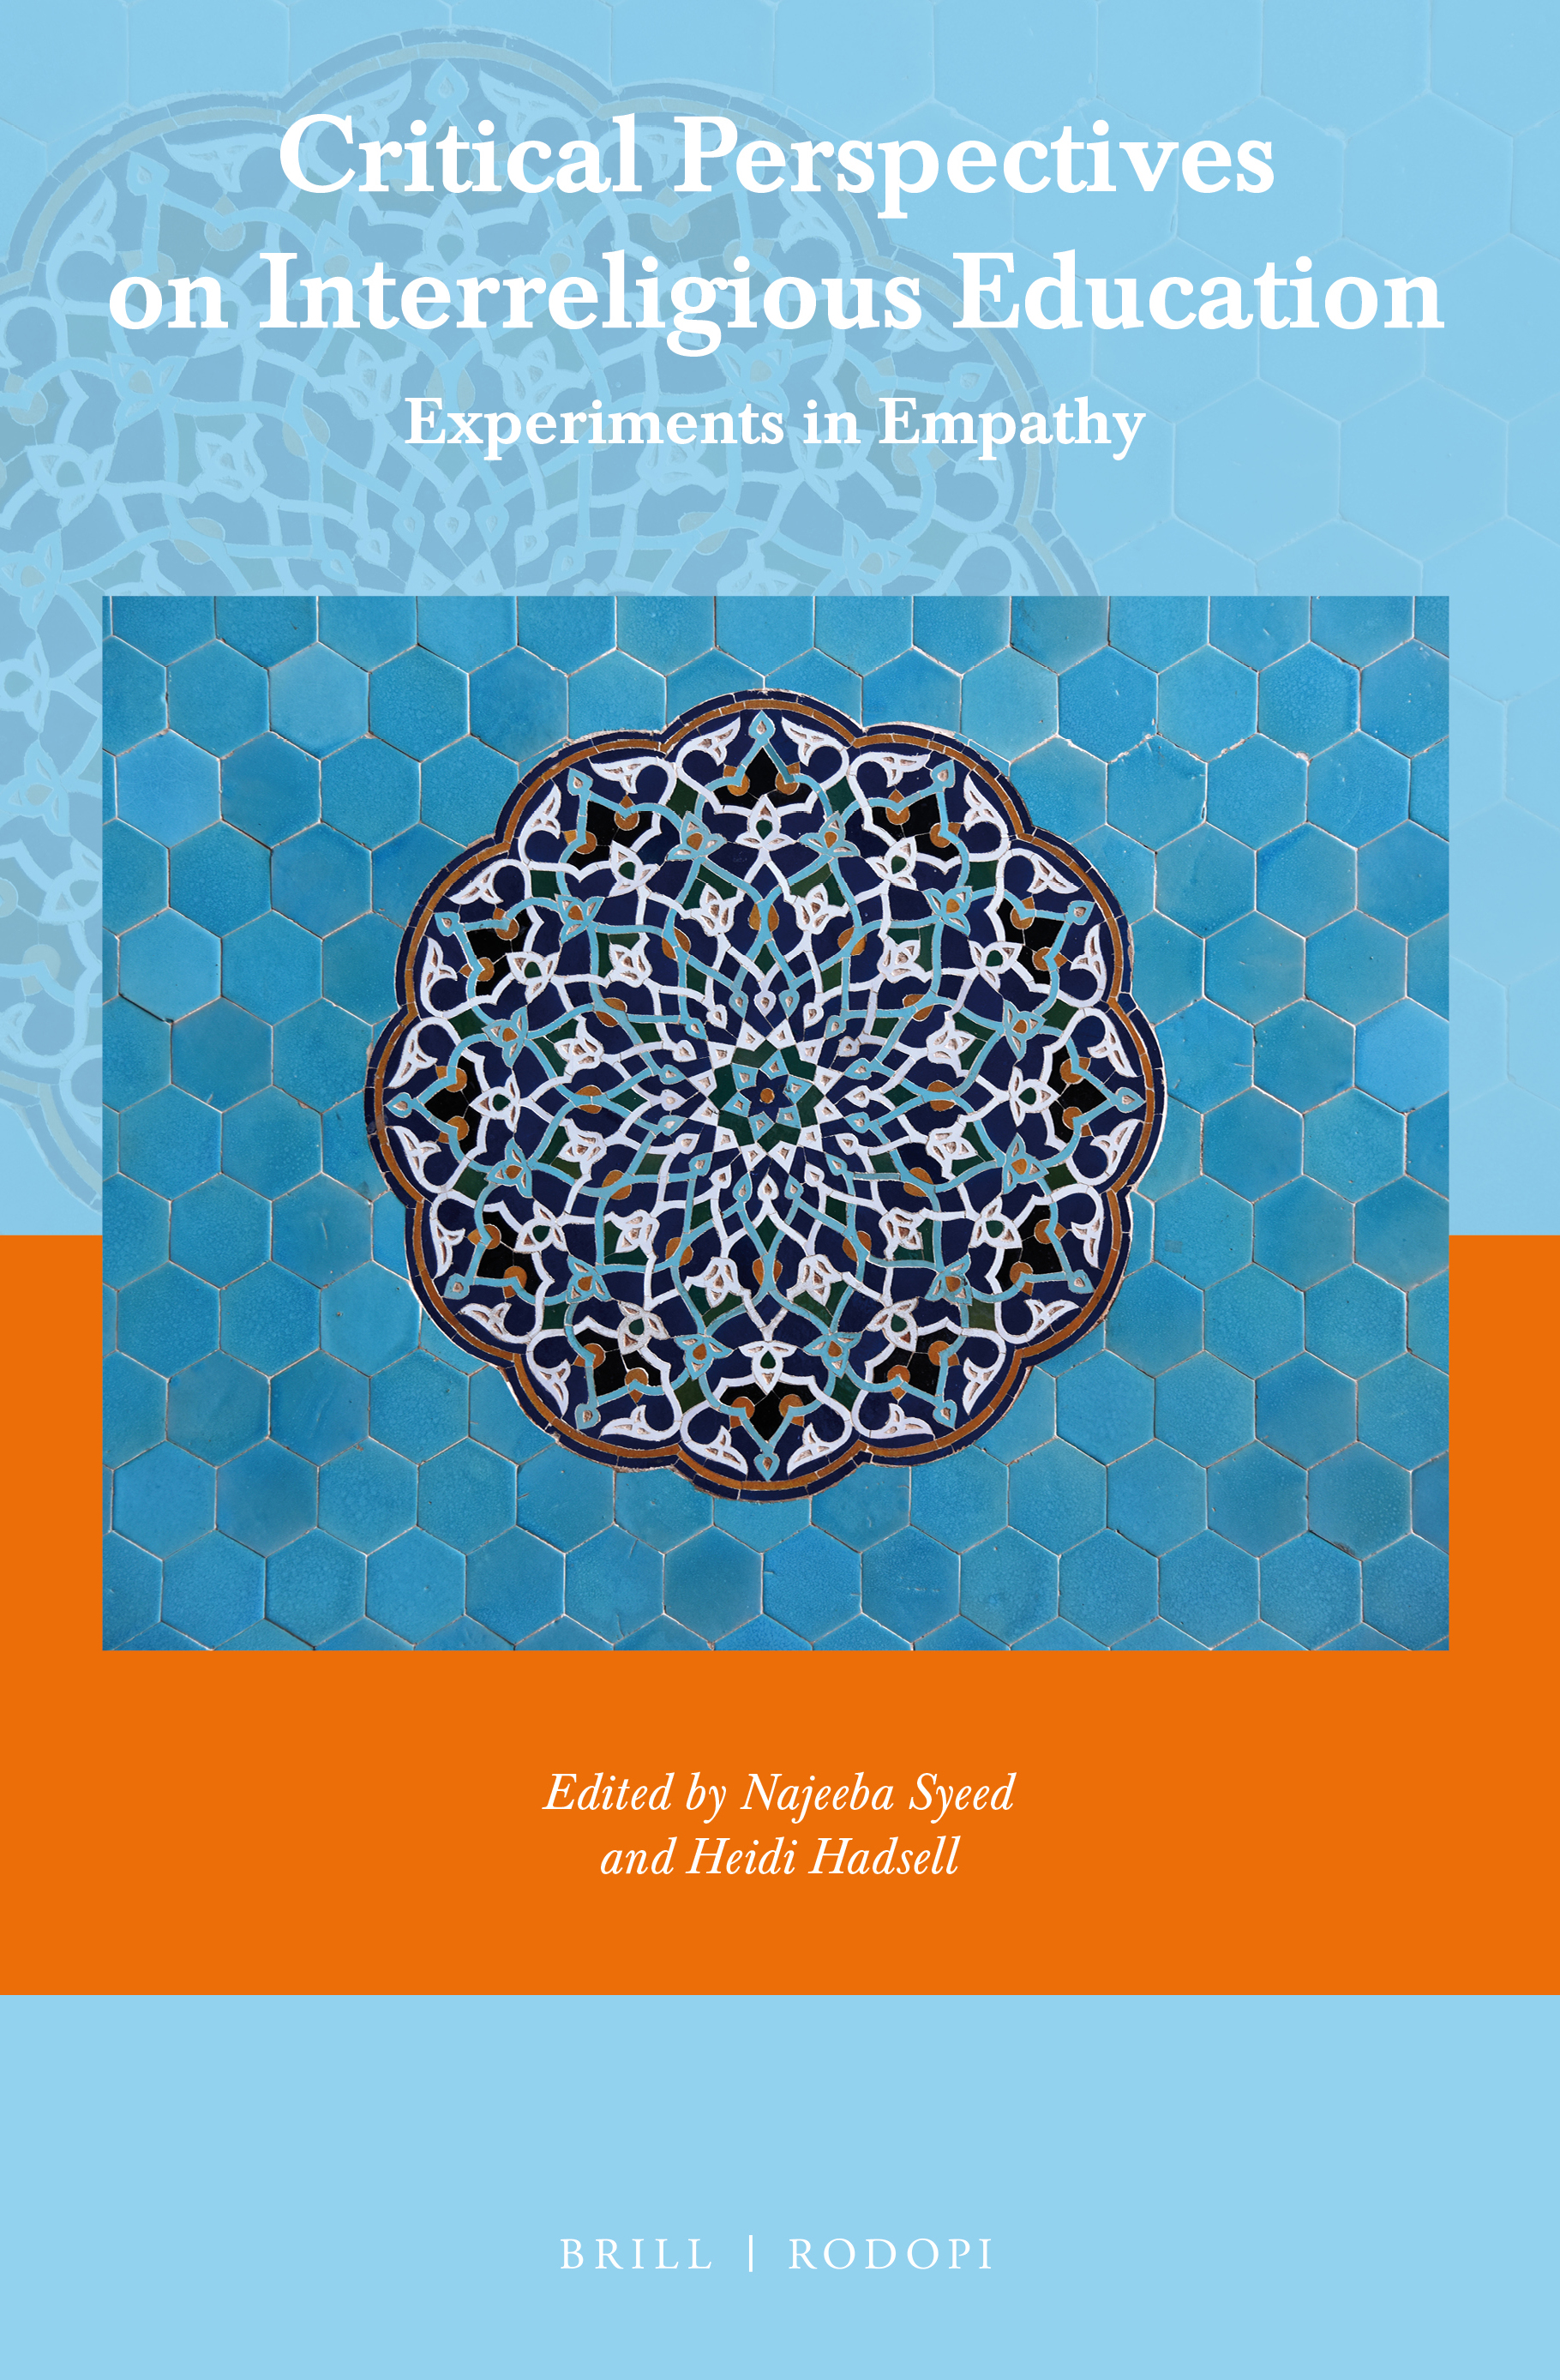 Front cover image of Critical Perspectives on Interreligious Education: Experiments in Empathy, edited by Najeeba Syeed and Heidi Hadsell